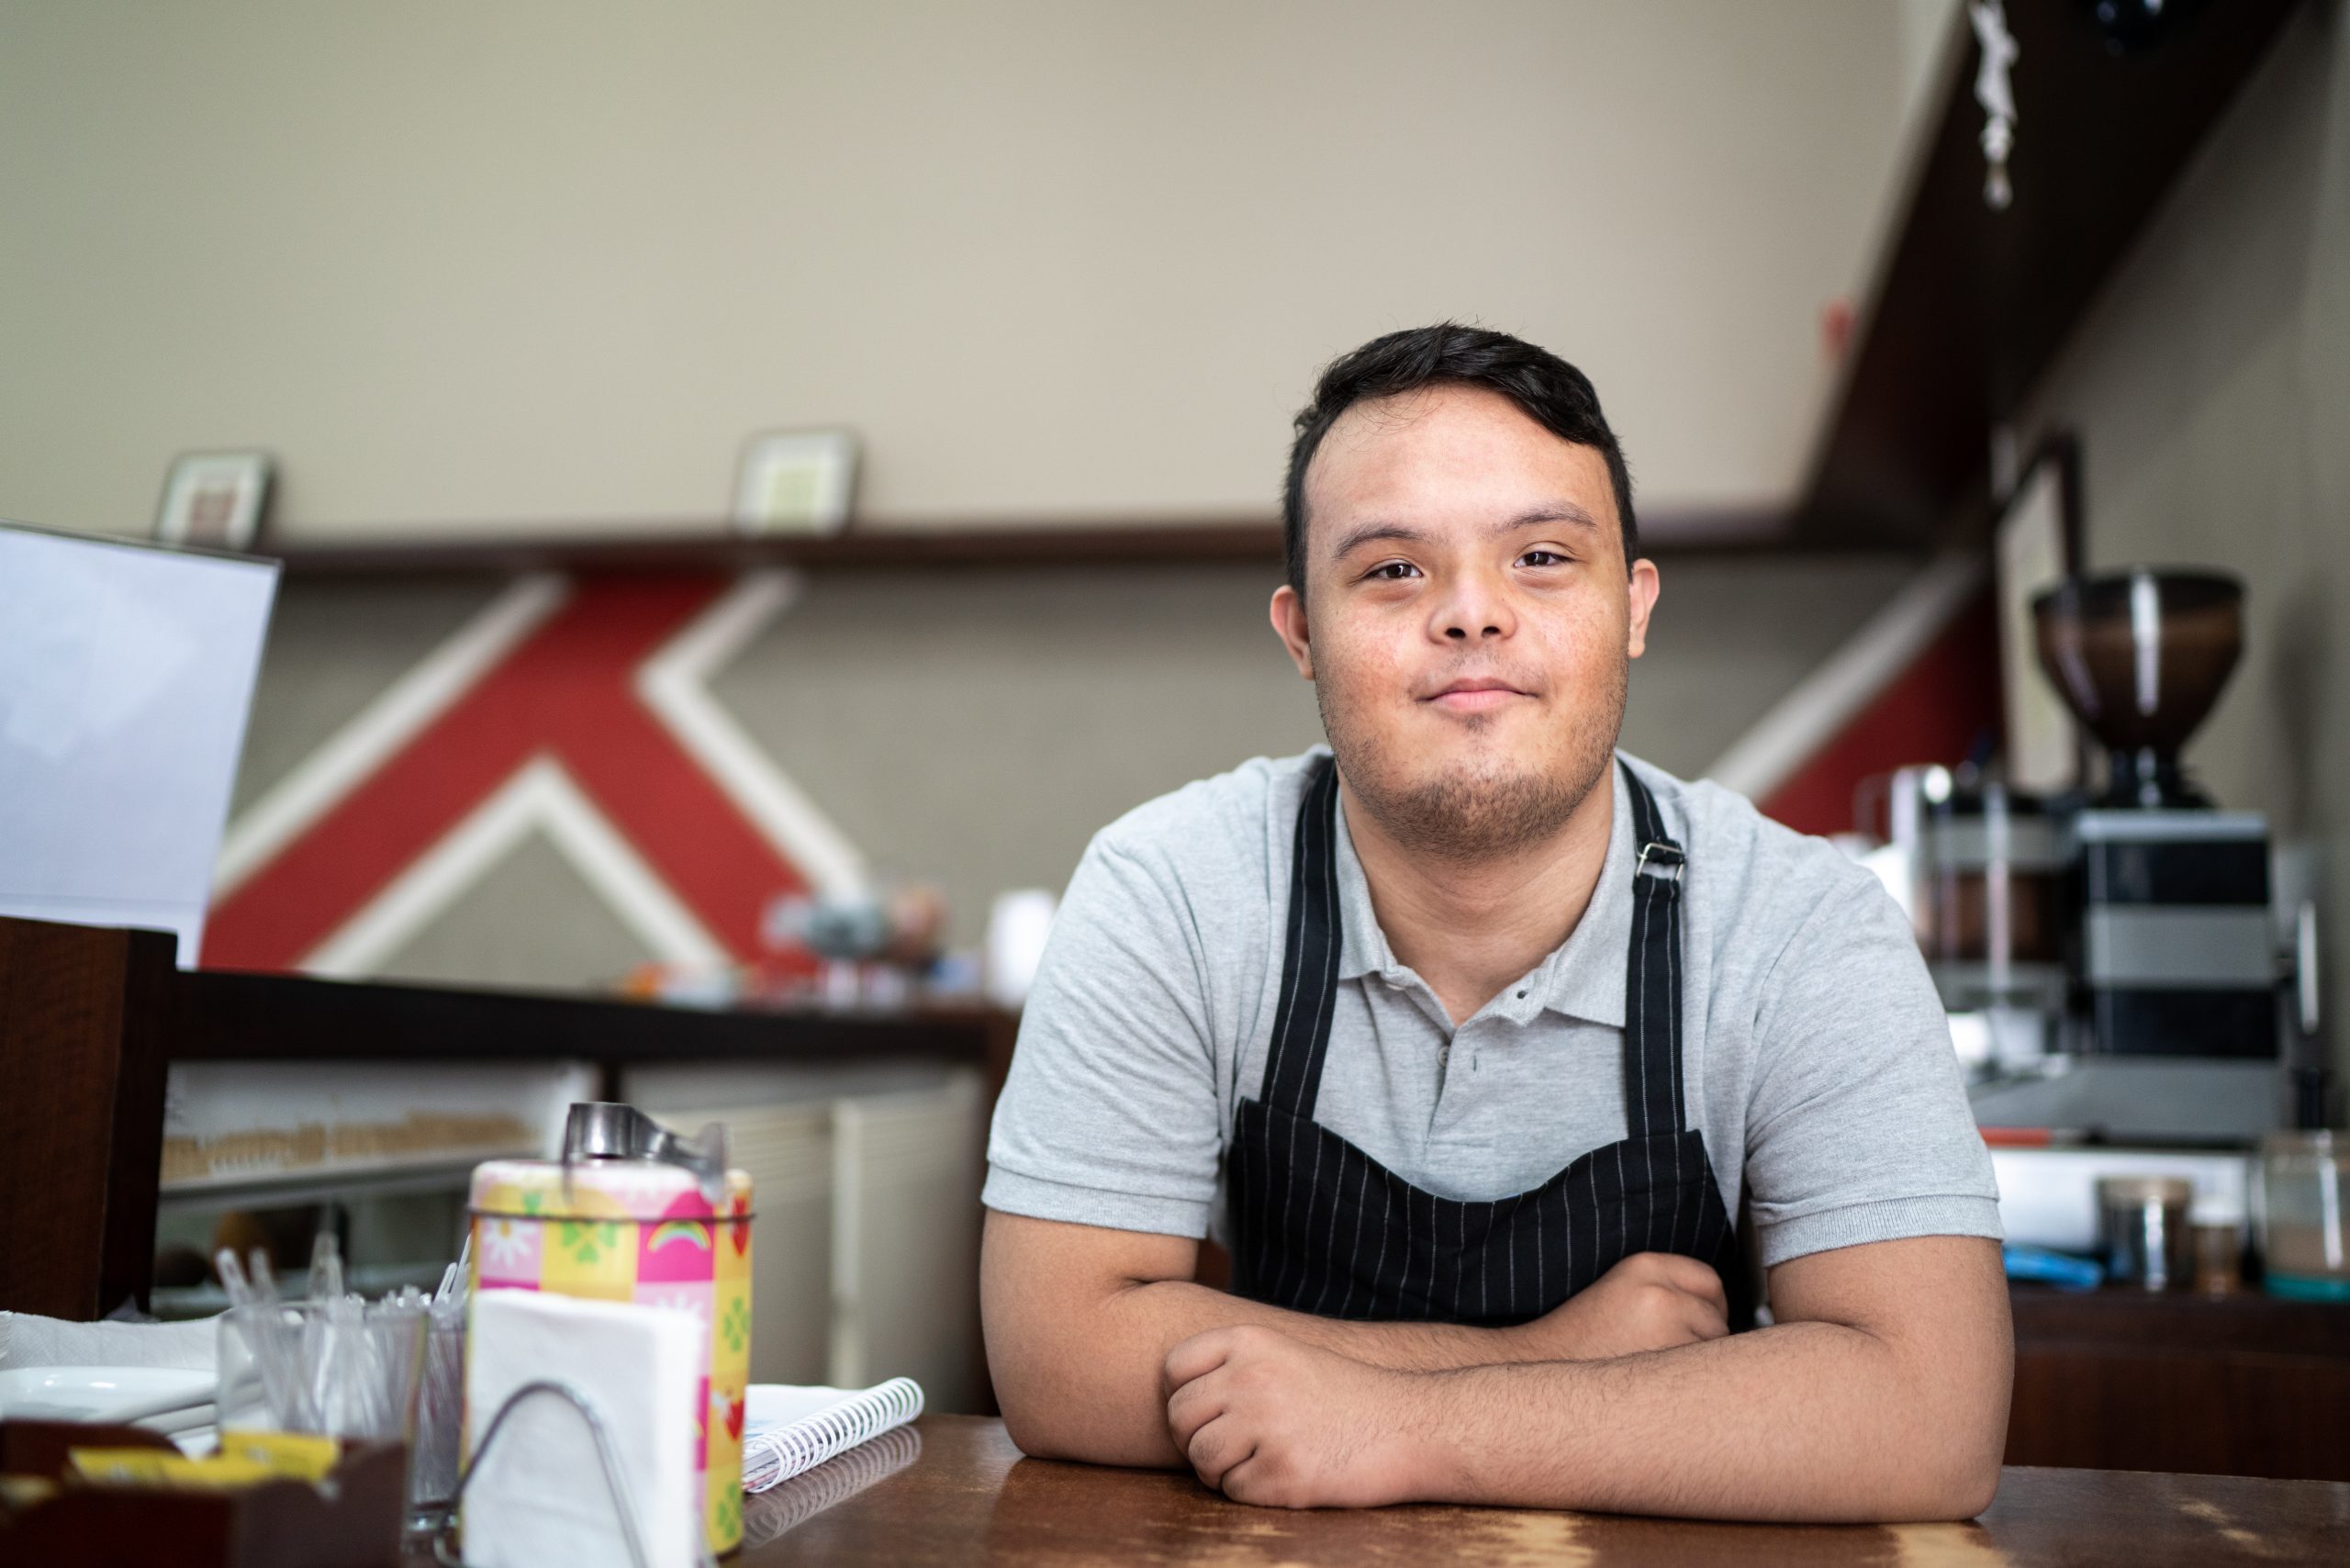 A photo of a young man with Downs Syndrome working behind the counter at a cafe